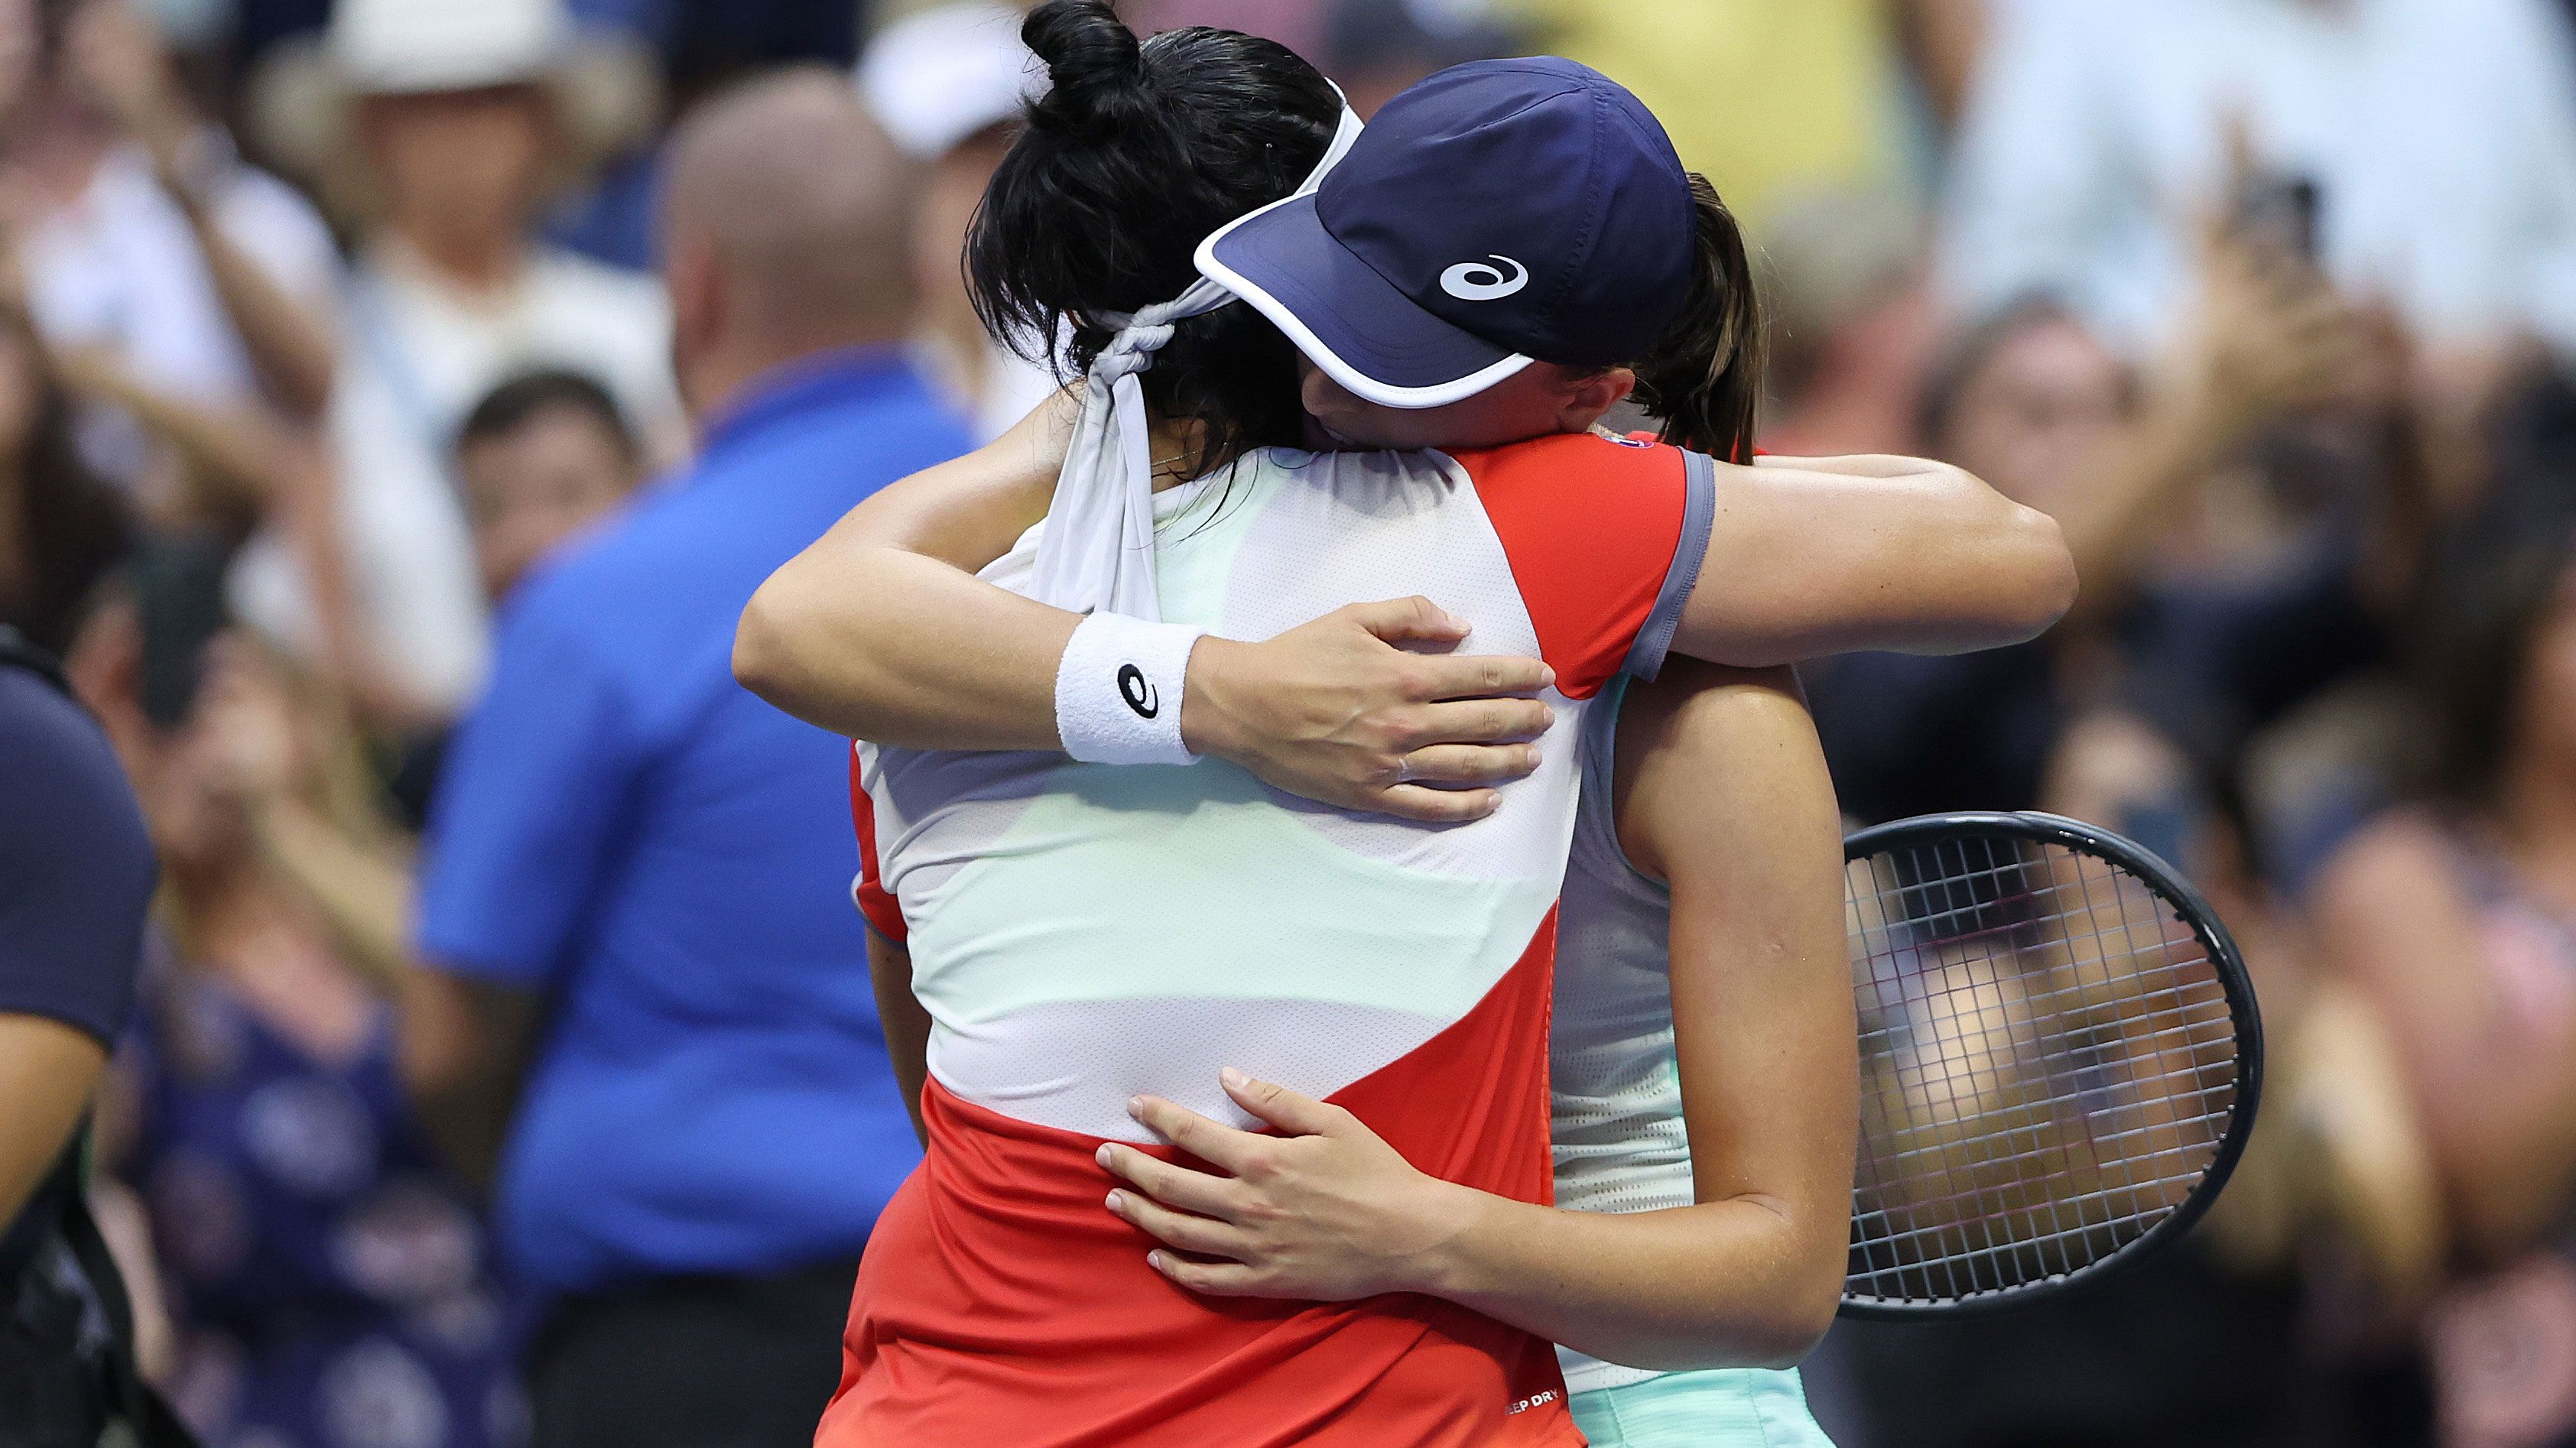 Iga Swiatek embraces Ons Jabeur as she claims her first US Open title in straight sets